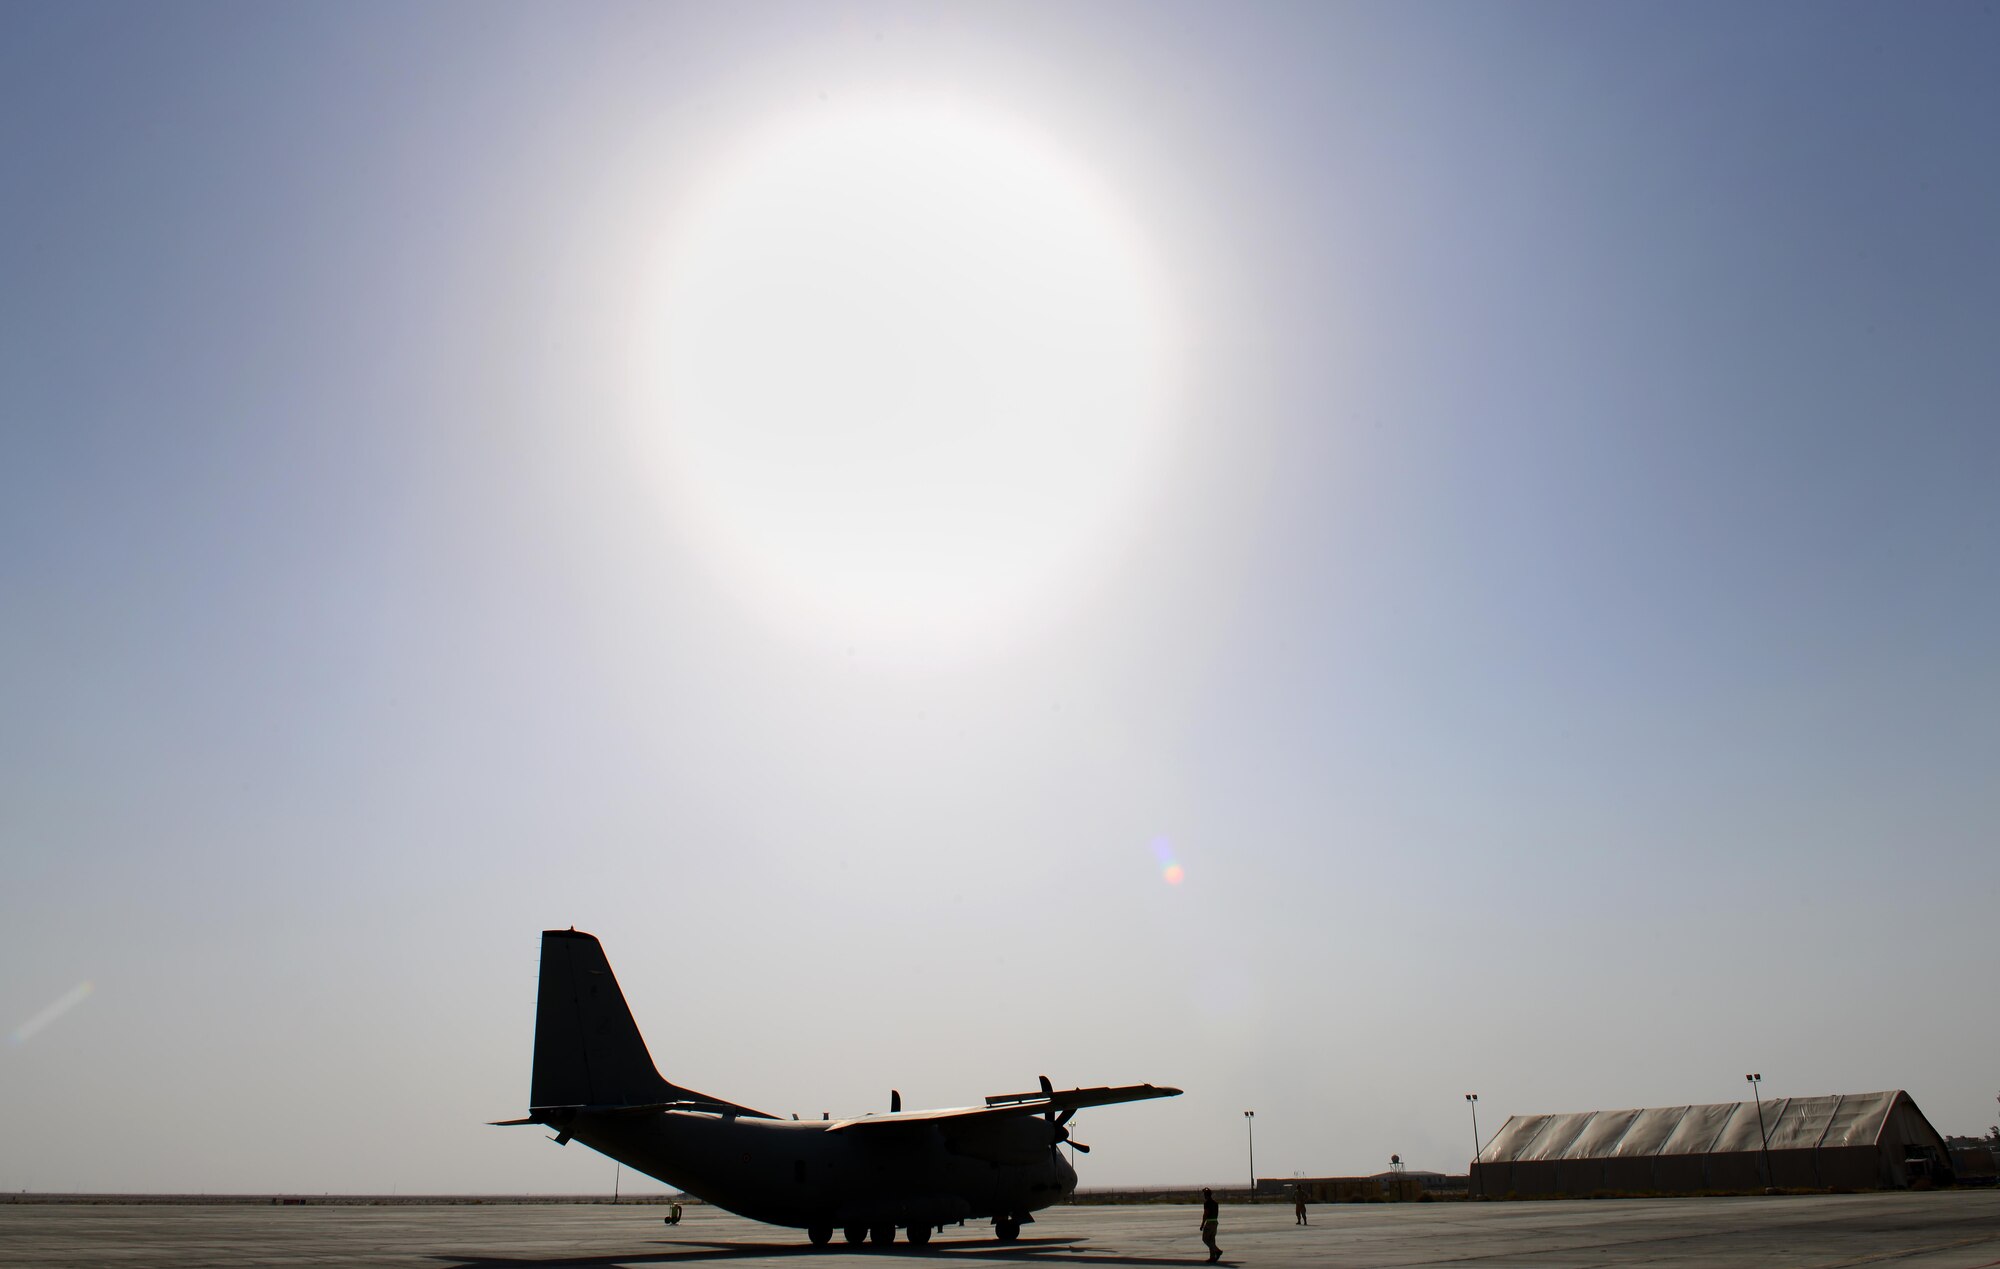 An Italian Air Force (ITAF) C-27 aircraft comes to a halt after landing during a simulated in-flight emergency in Southwest Asia on July 2, 2017. The 407th Air Expeditionary Group fire department responded to the call of a distressed aircraft and assisted in the removal of injured crew members during the simulated in-flight emergency scenario. 407th AEG fire department are first responders to any and all incidents dealing with U.S. and coalition aircraft. (U.S. Air Force photo by Tech Sgt. Andy M. Kin)